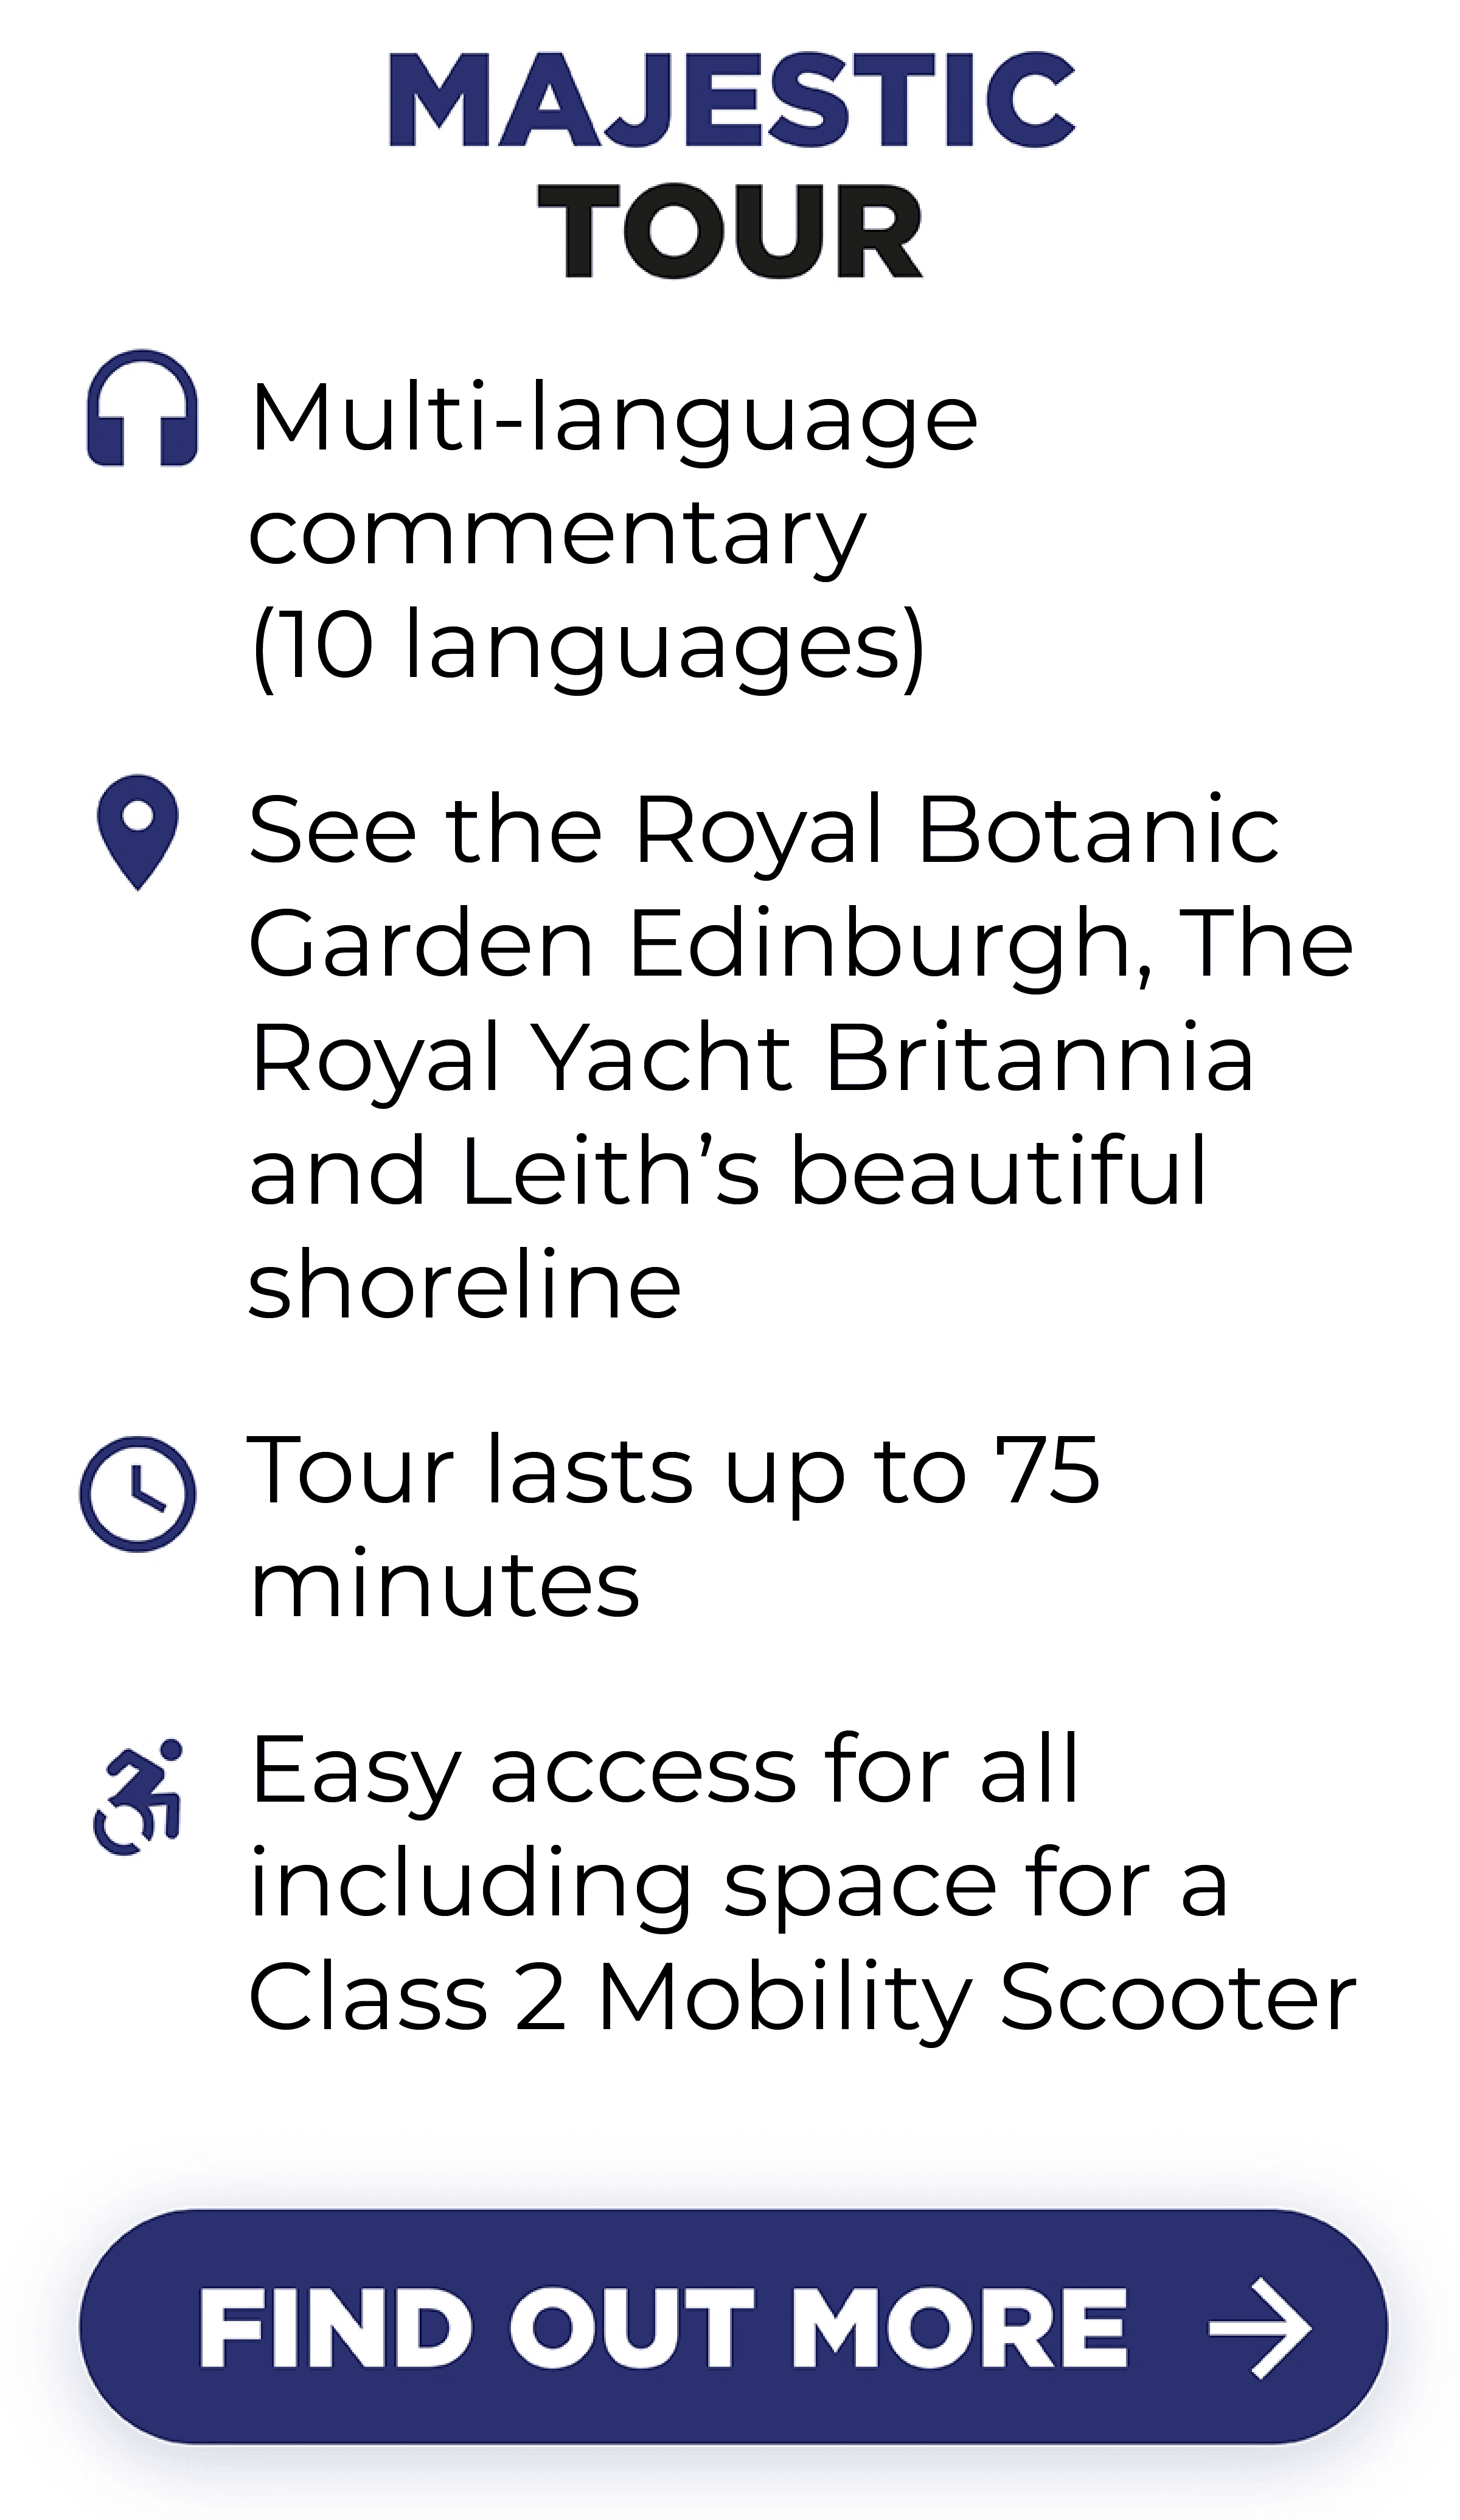 Majestic Tour includes Multi-language(10) commentaries. Royal Botanic Garden Edinburgh, The Royal Yacht Britannia and Leith’s shoreline. Tour lasts up to 75 minutes and it is easily accessible for all, including space for a Class 2 Mobility Scooter.